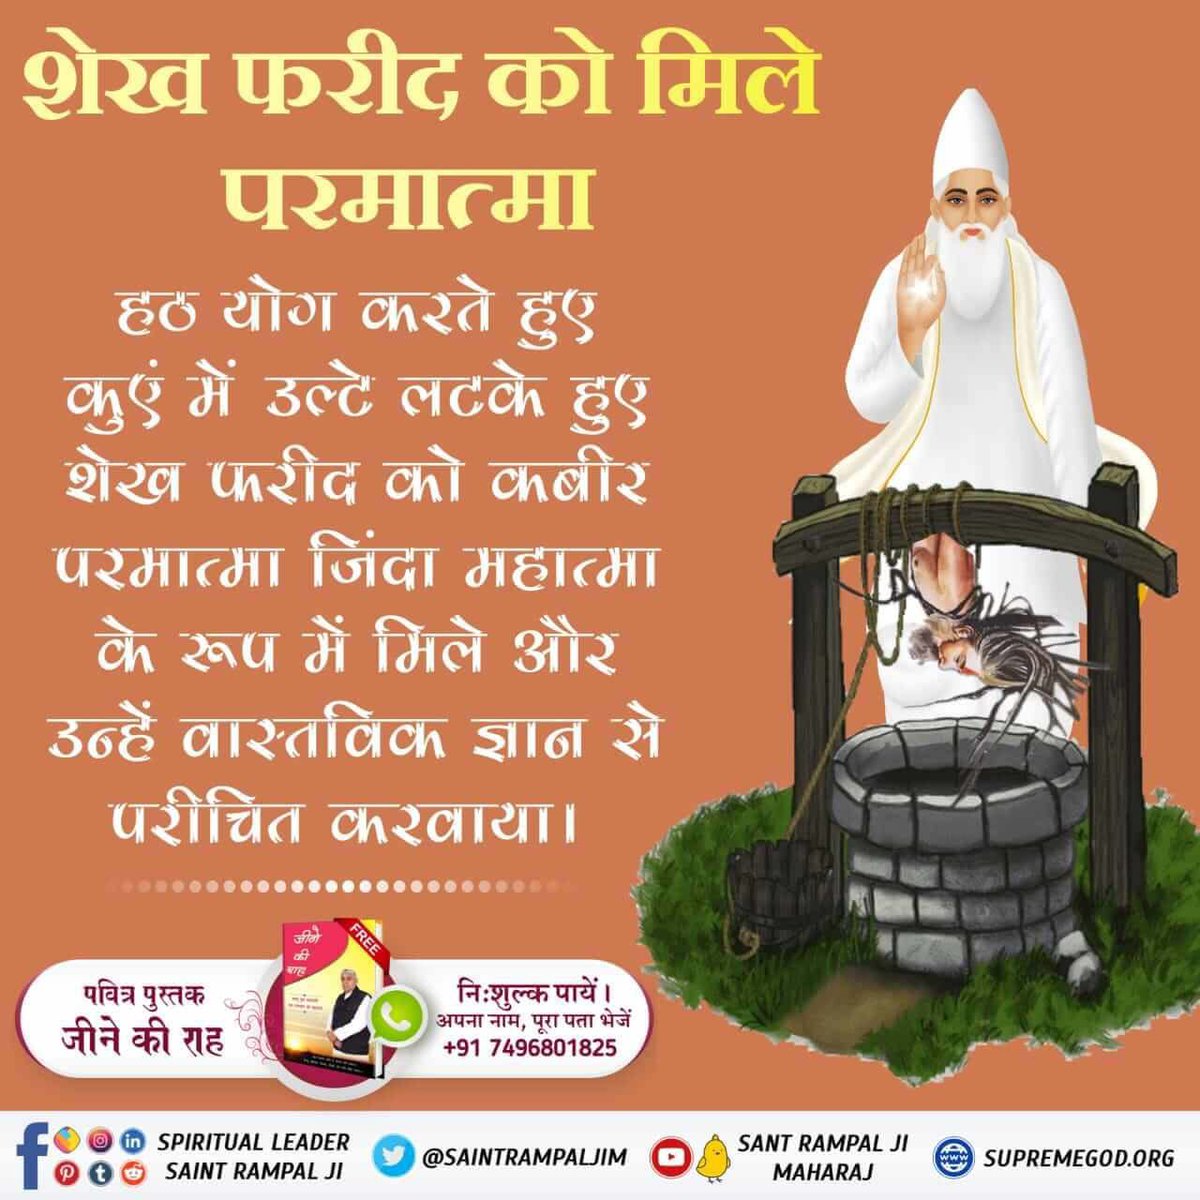 #आँखों_देखा_भगवान_को सुनो उस अमृतज्ञान को
While practicing Hatha Yoga, Sheikh Farid, hanging upside down in a well, encountered Lord Kabir as a living great soul, who acquainted him with true knowledge.

Download our Official App 'Sant Rampal Ji Maharaj'